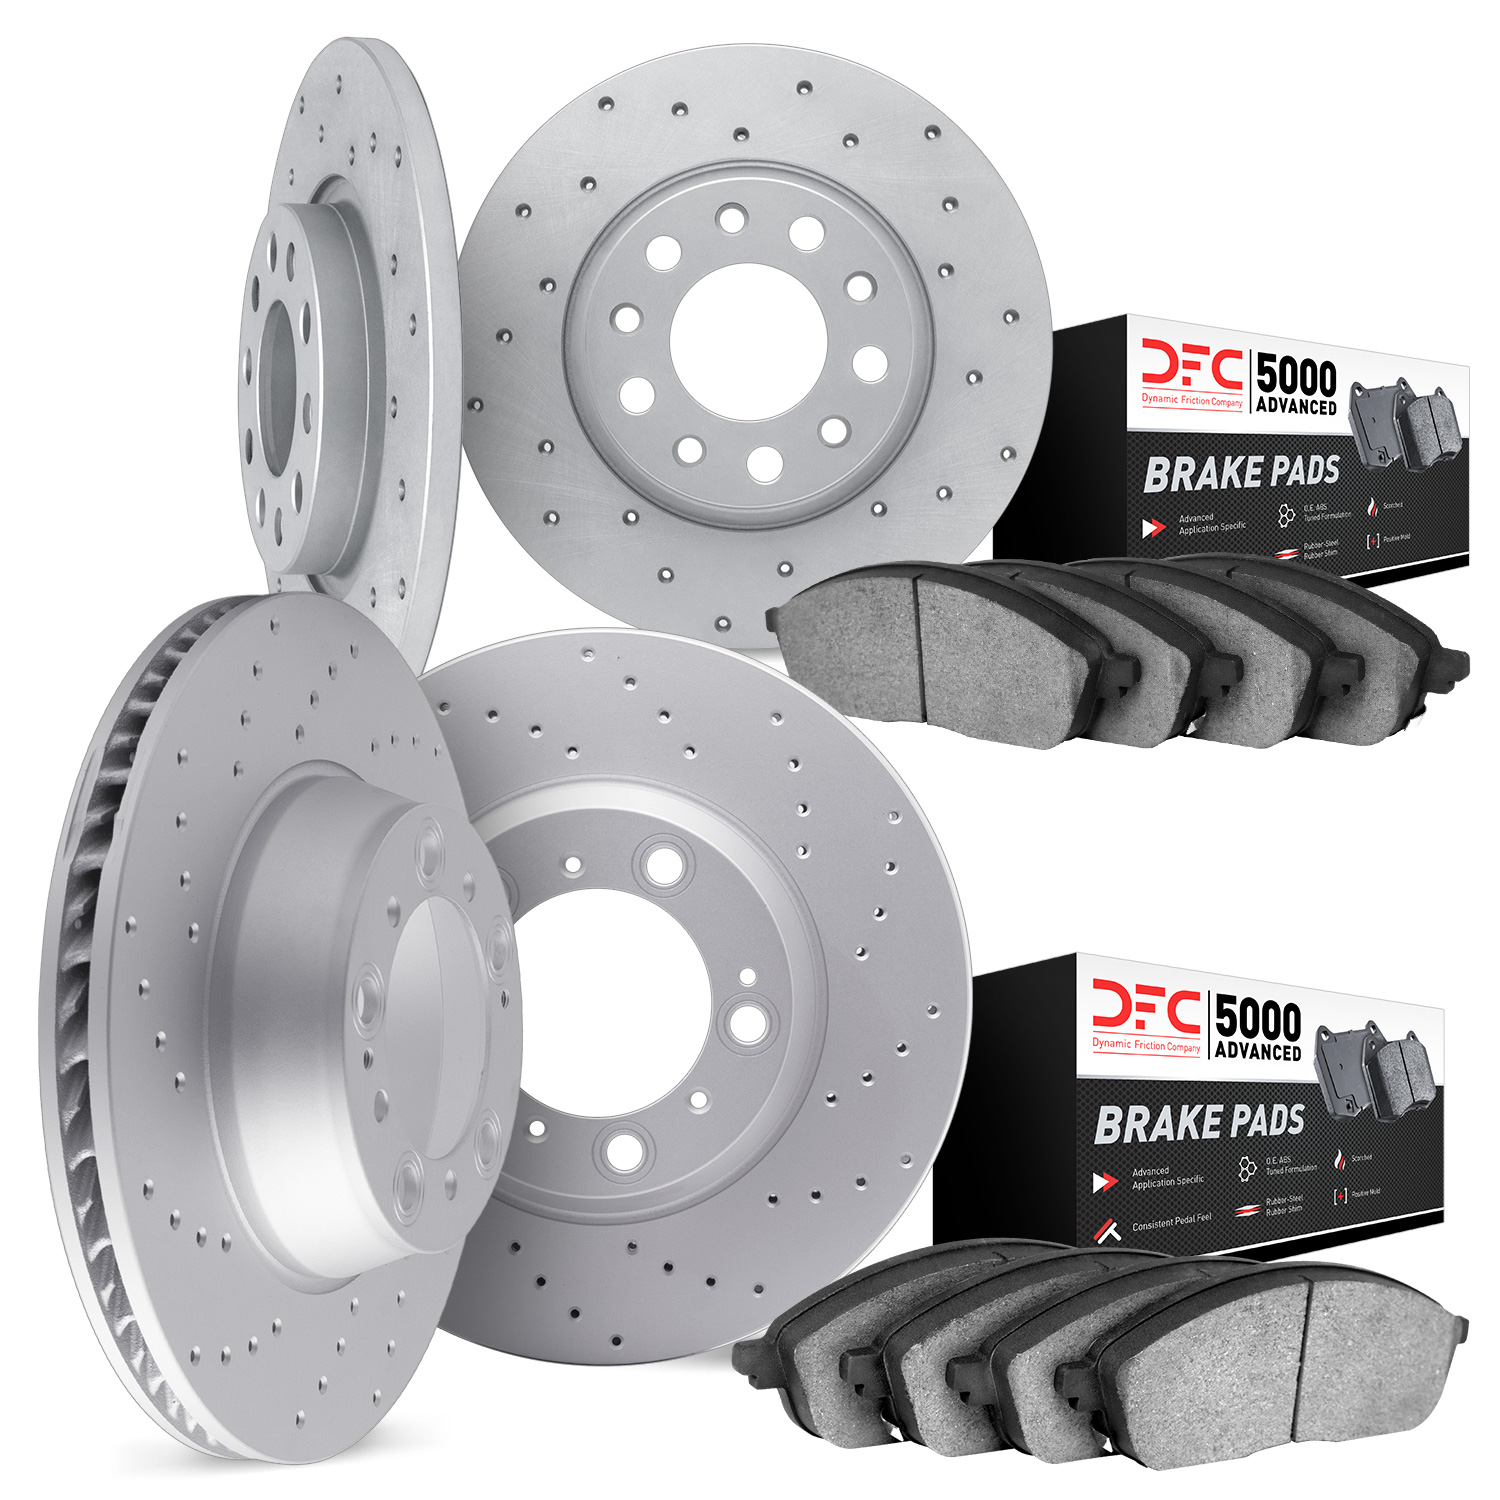 2704-32011 Geoperformance Drilled Brake Rotors with Active Performance Pads Kit, Fits Select Mini, Position: Front and Rear